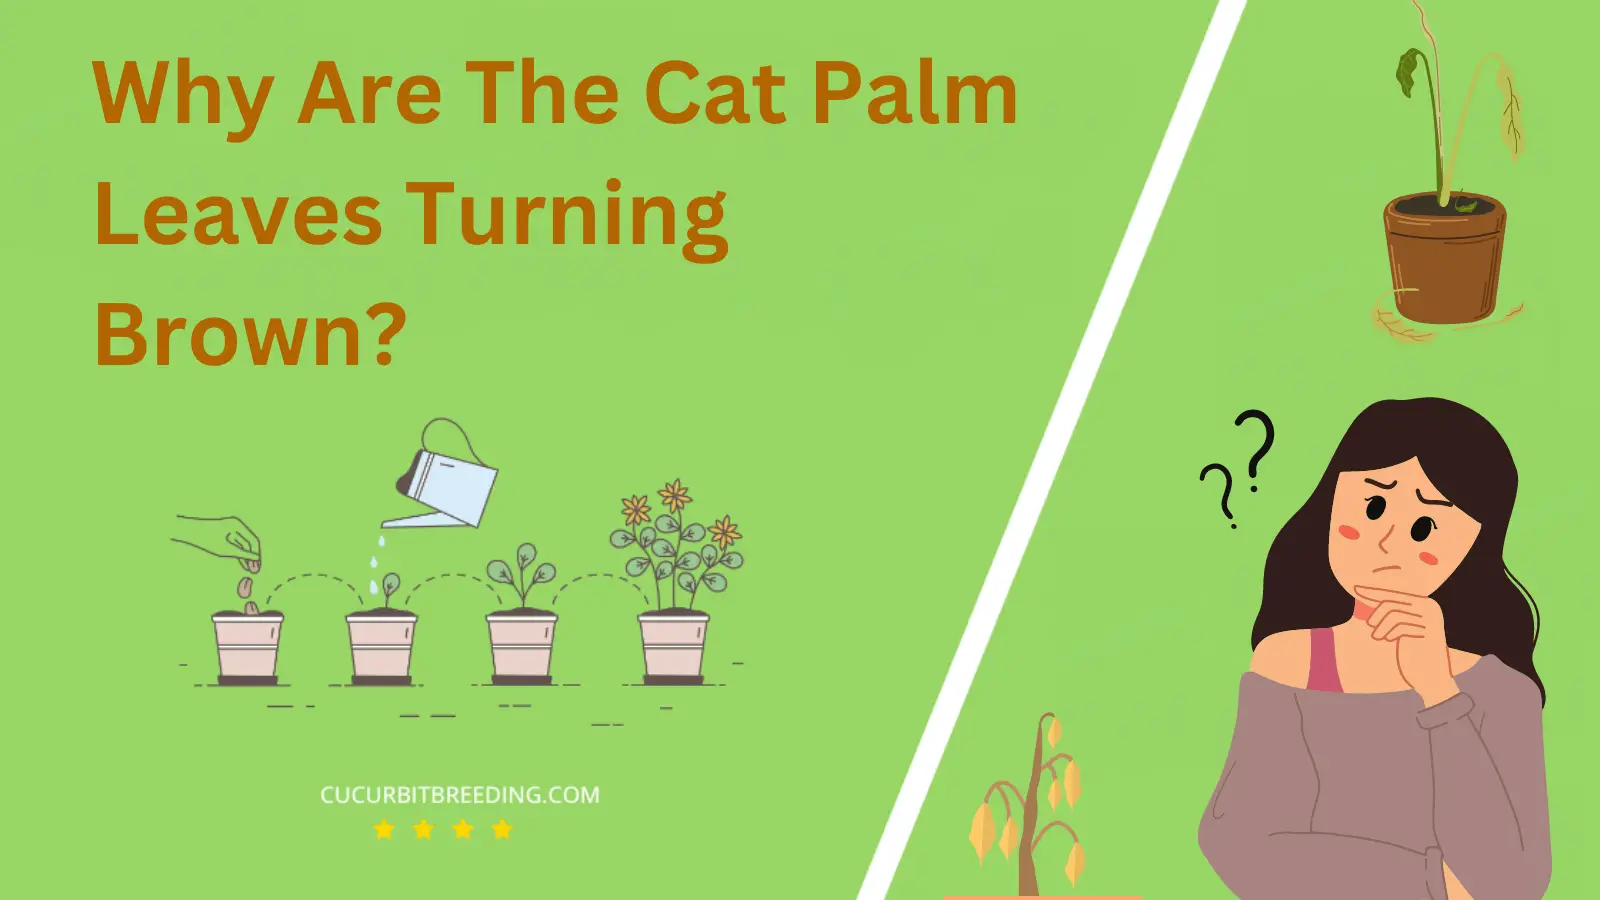 Why Are The Cat Palm Leaves Turning Brown